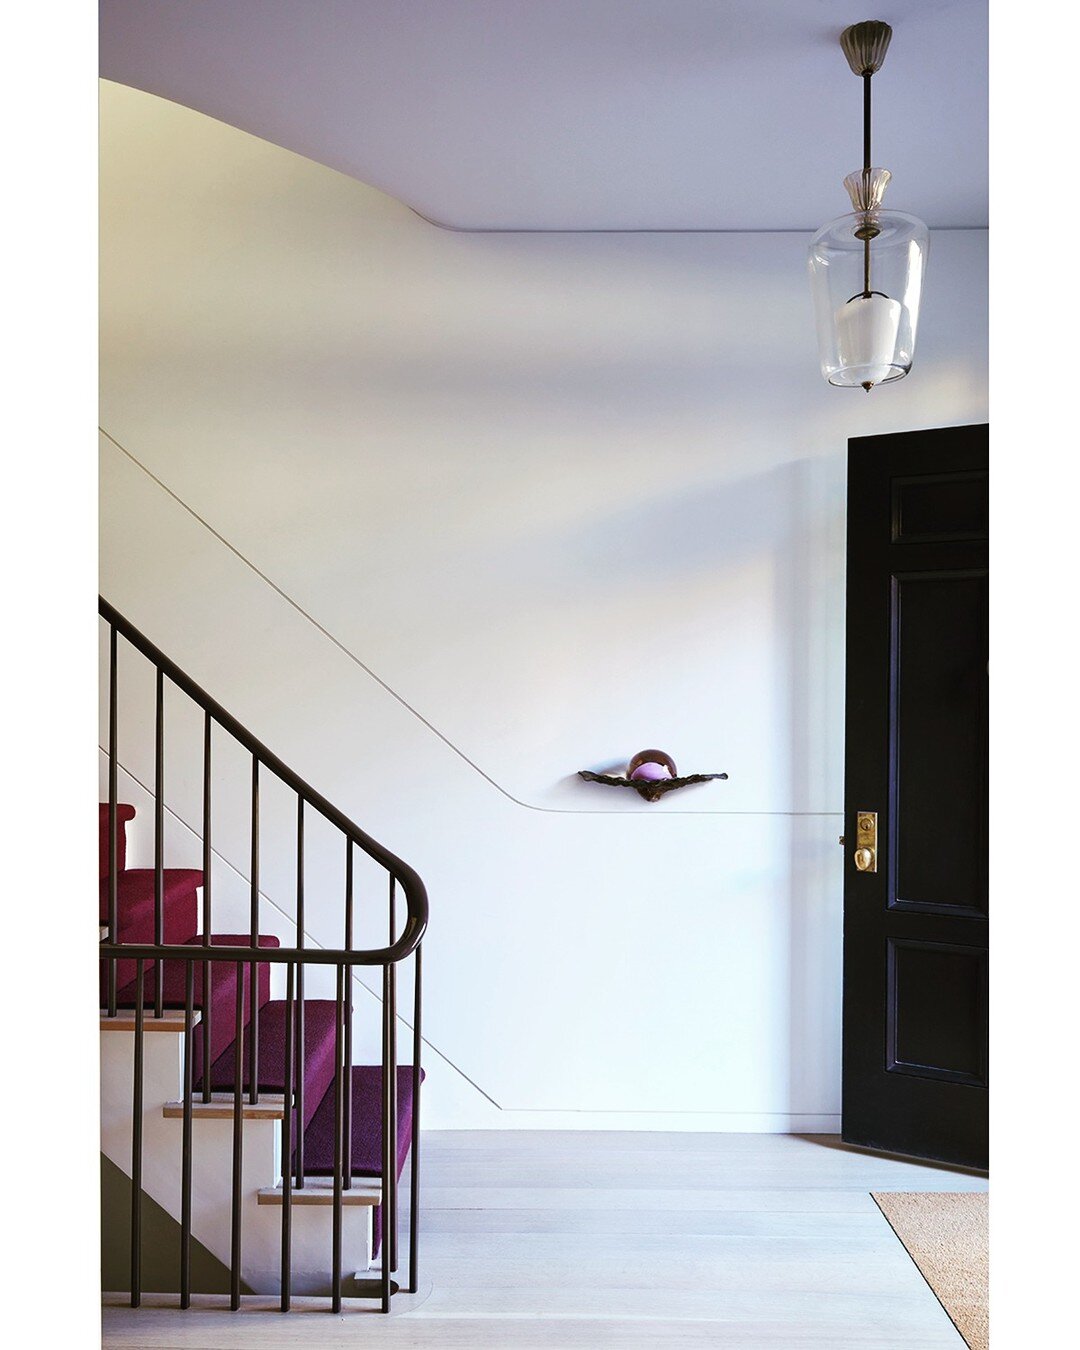 The Entry. Architecture by @amiesachsarchitects who detailed a beautiful and practical Corian wainscoting. Construction by Momentas.
Gorgeous &quot;Clam I Am&quot; sculpture by @thehaasbrothers from @randcompanynyc, stair runner from @kasthall, vinta